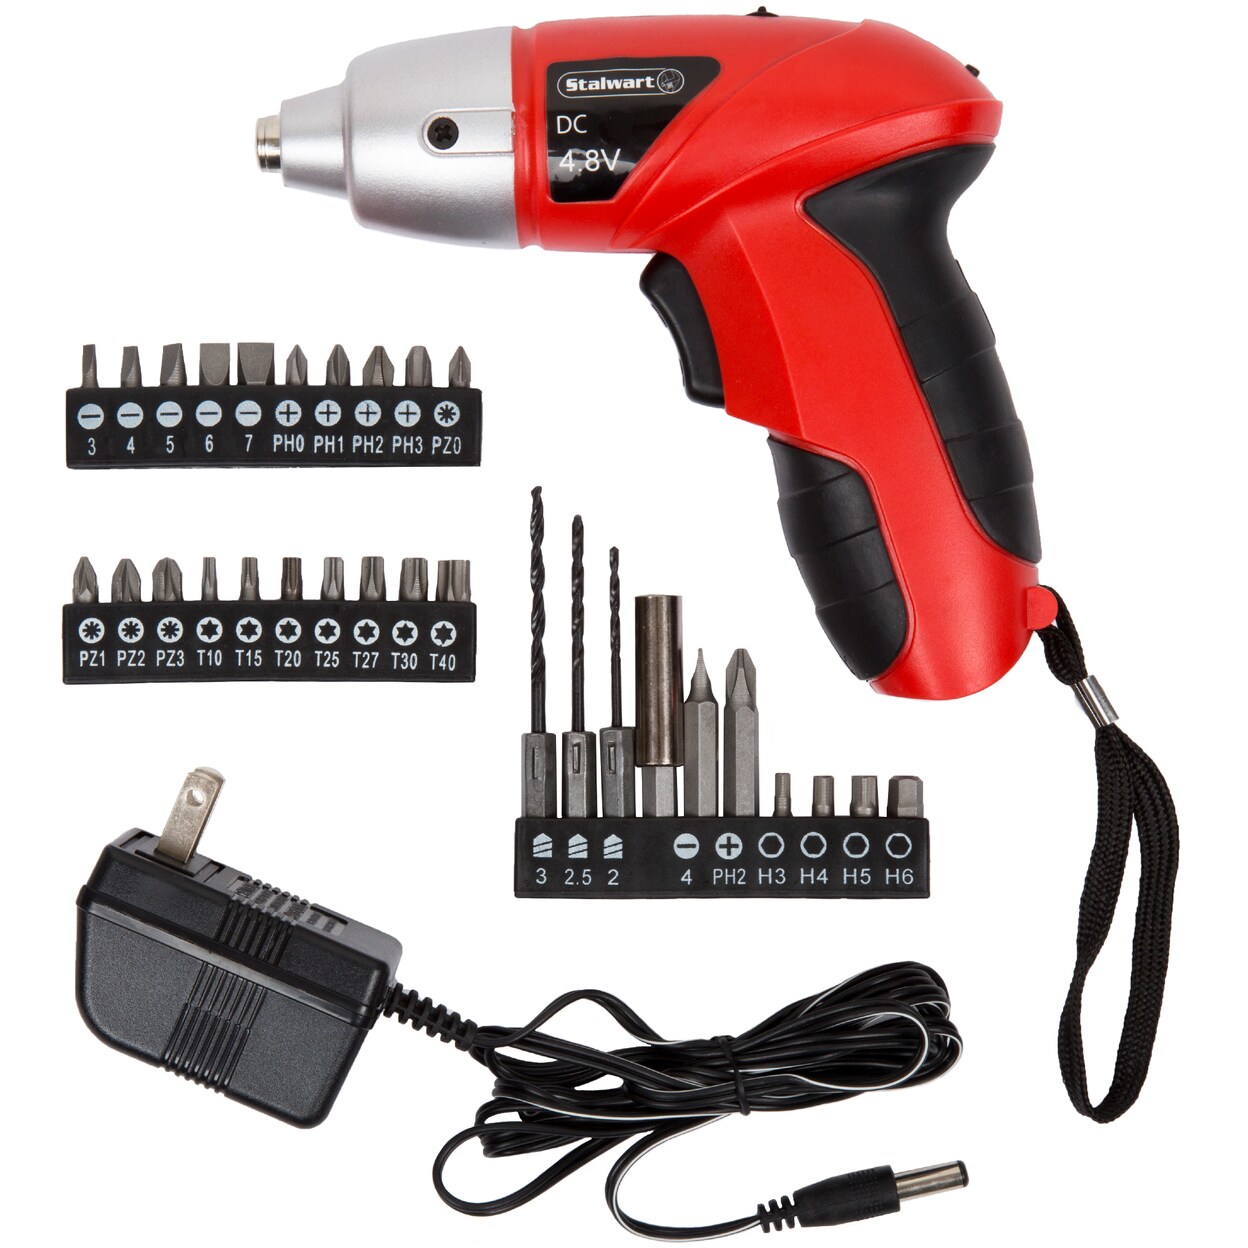 Stalwart 25 Pc 4.8V Cordless Screwdriver with LED Work Light Home Use Rechargeable